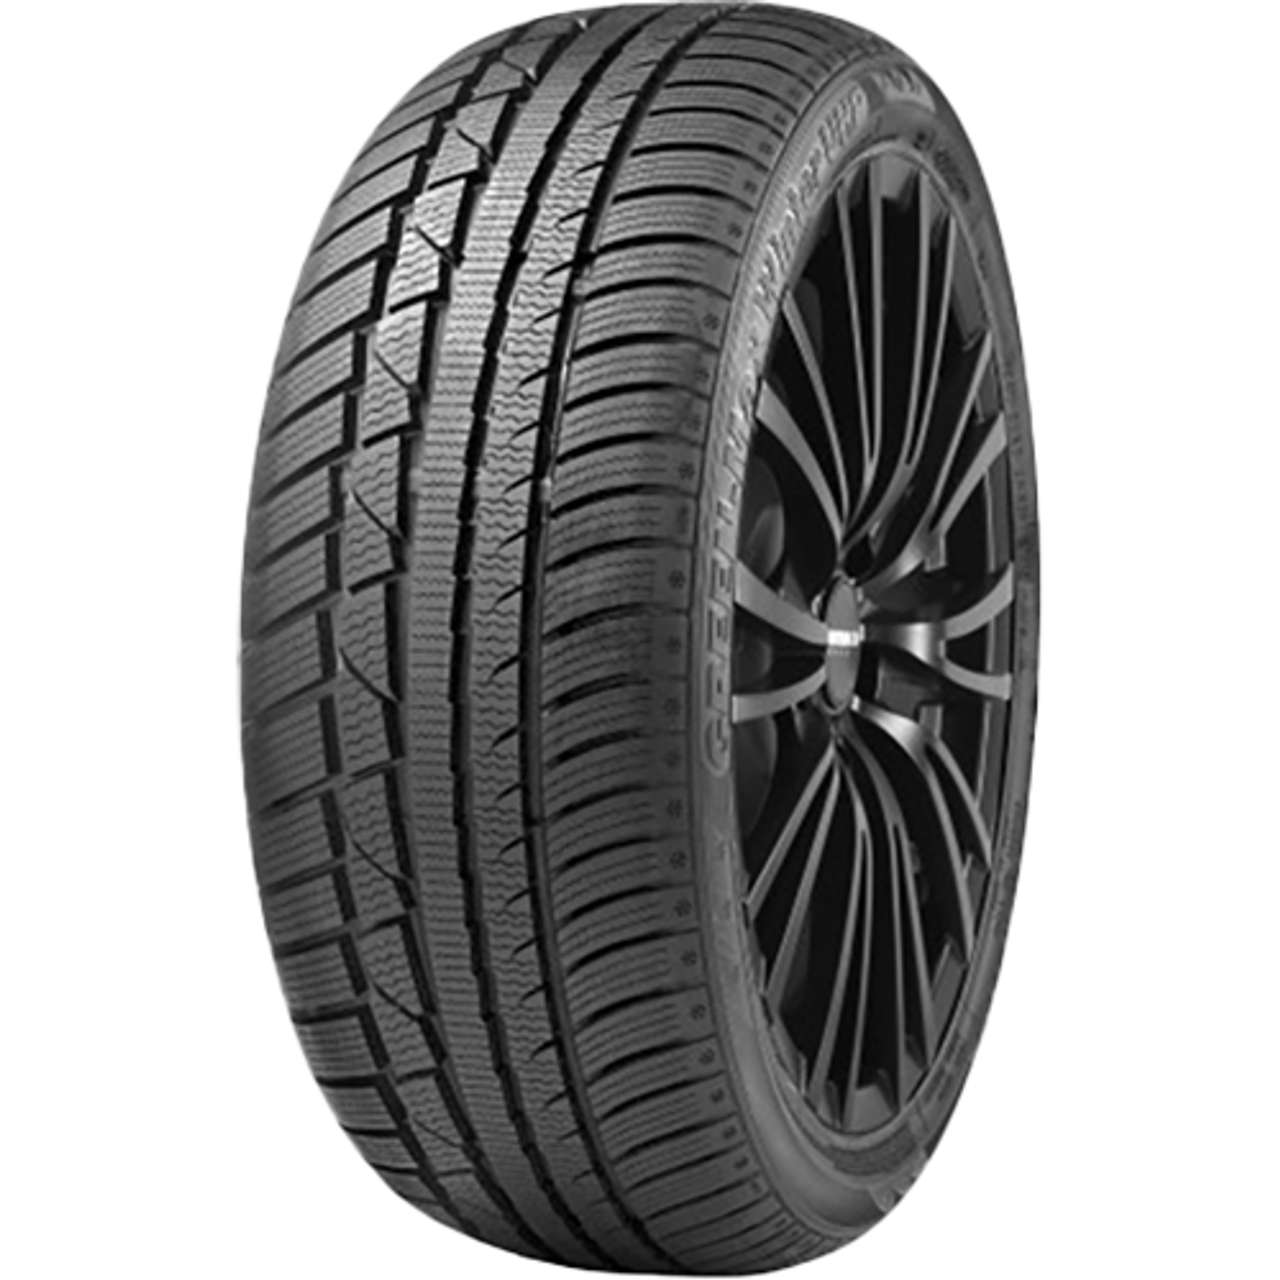 LINGLONG GREEN-MAX WINTER UHP 275/40R20 106V MFS BSW von LINGLONG